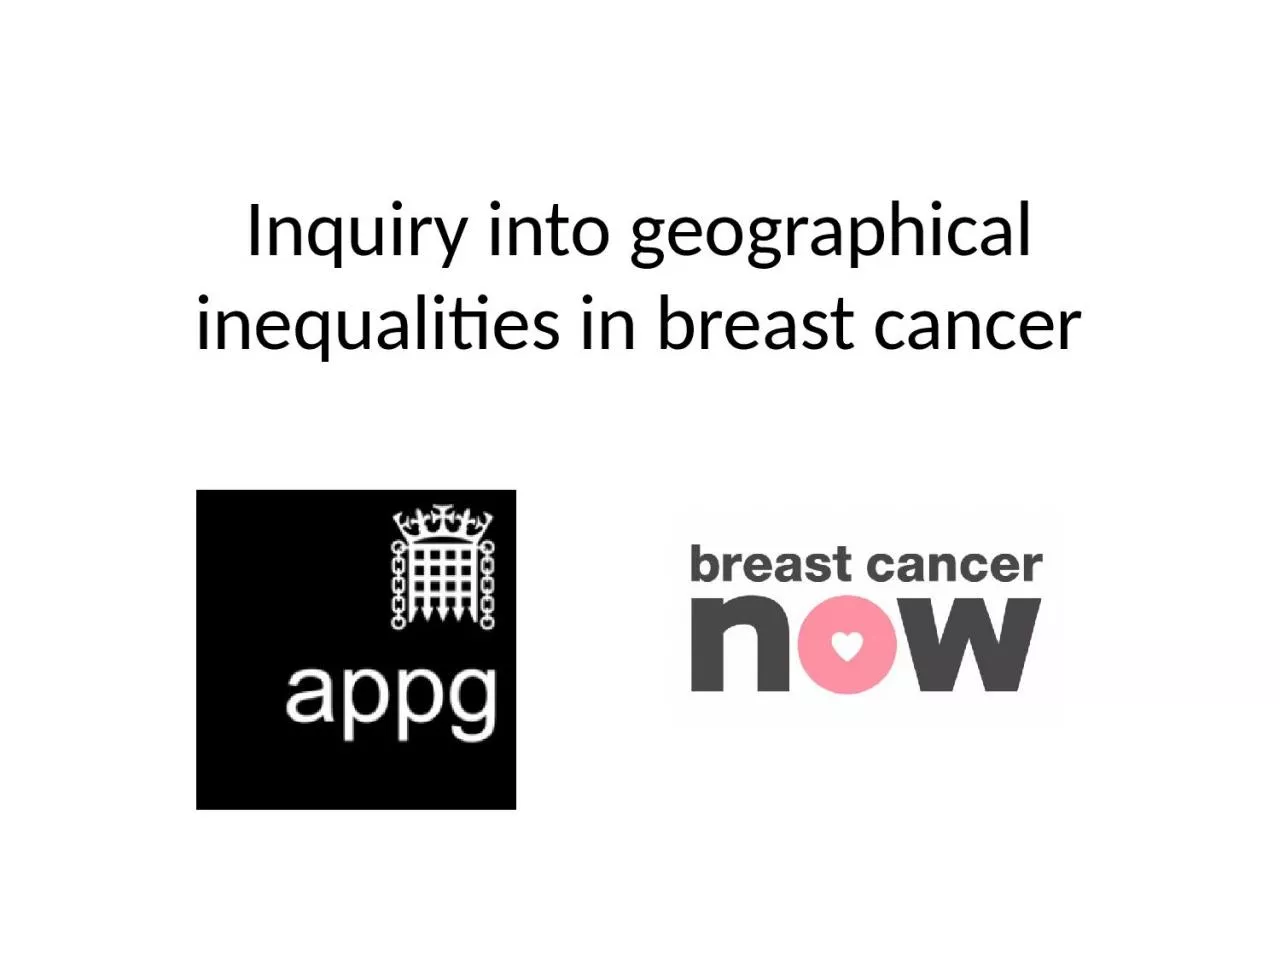 Inquiry into geographical inequalities in breast cancer